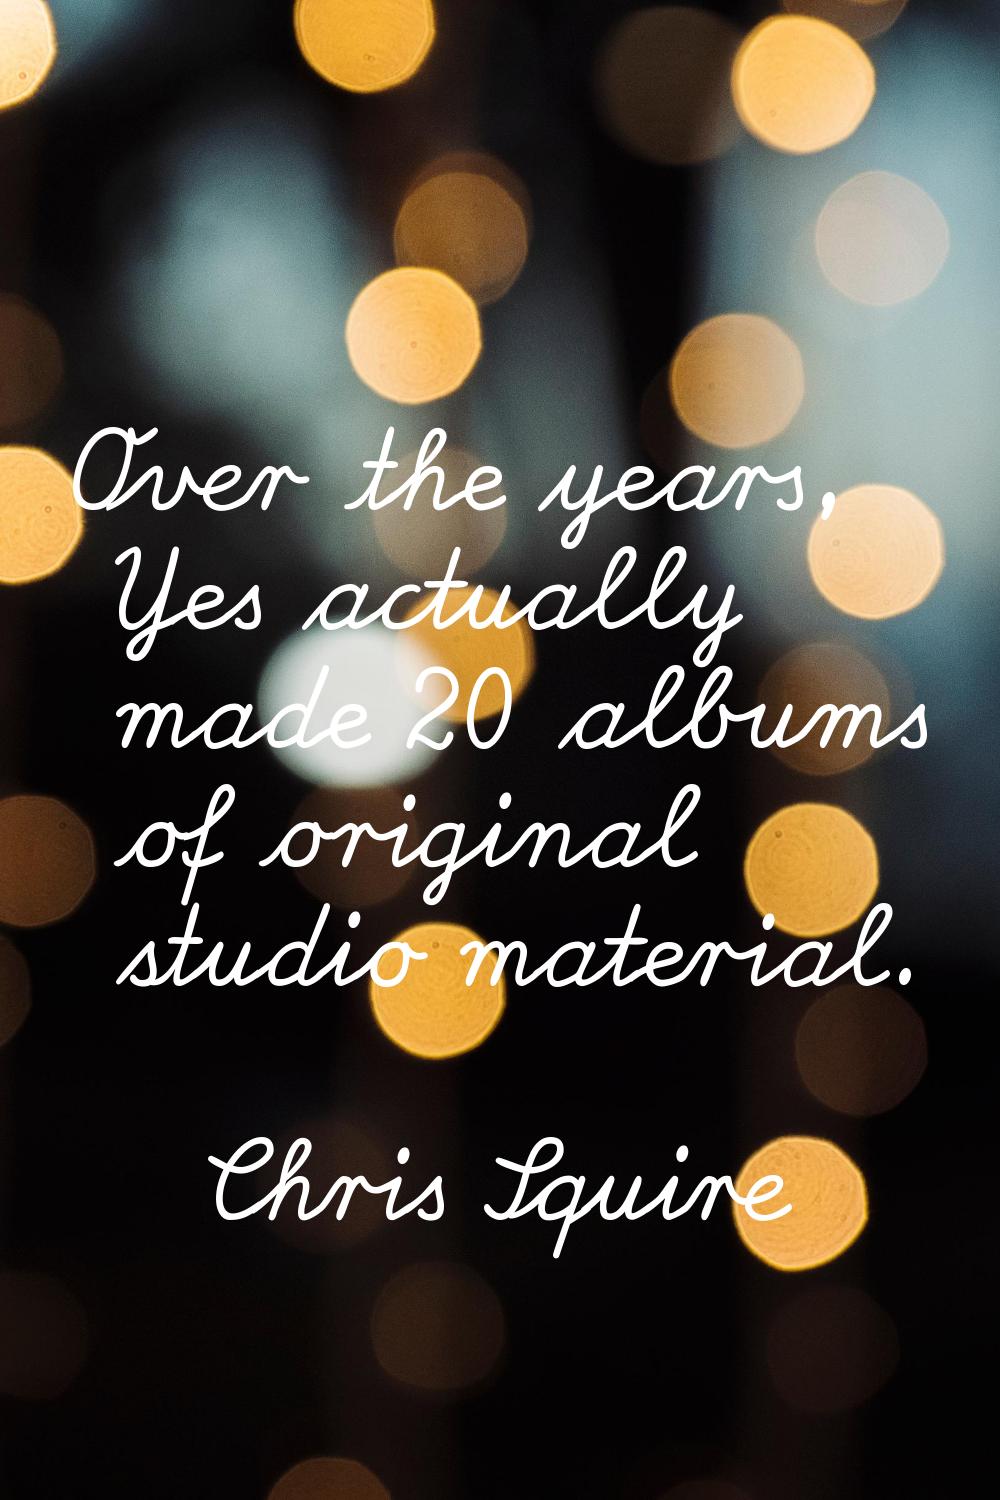 Over the years, Yes actually made 20 albums of original studio material.